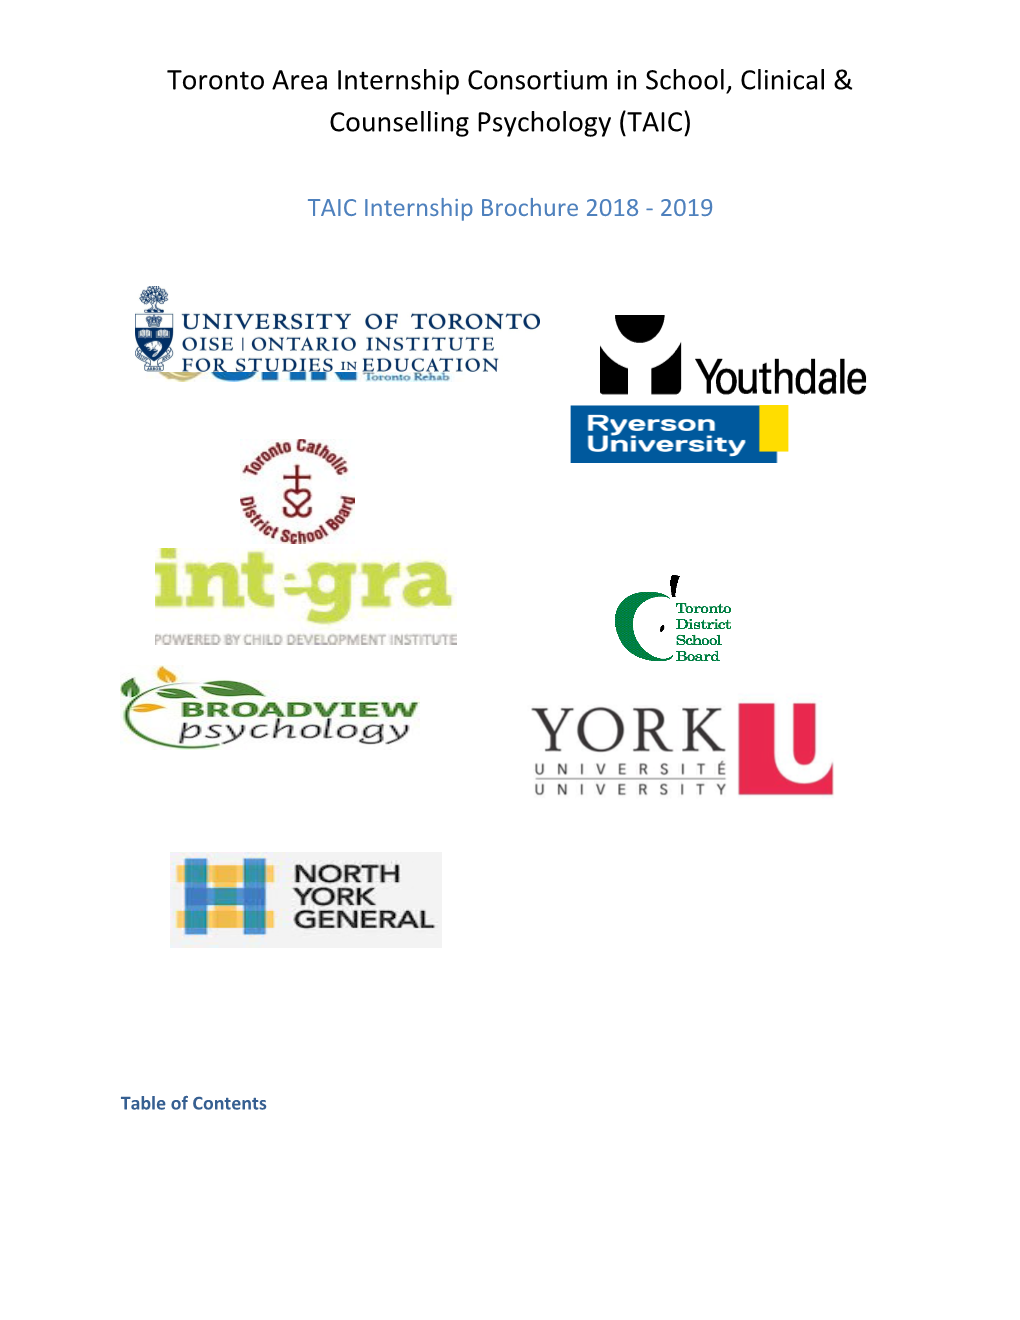 Toronto Area Internship Consortium in School, Clinical & Counselling Psychology (TAIC)